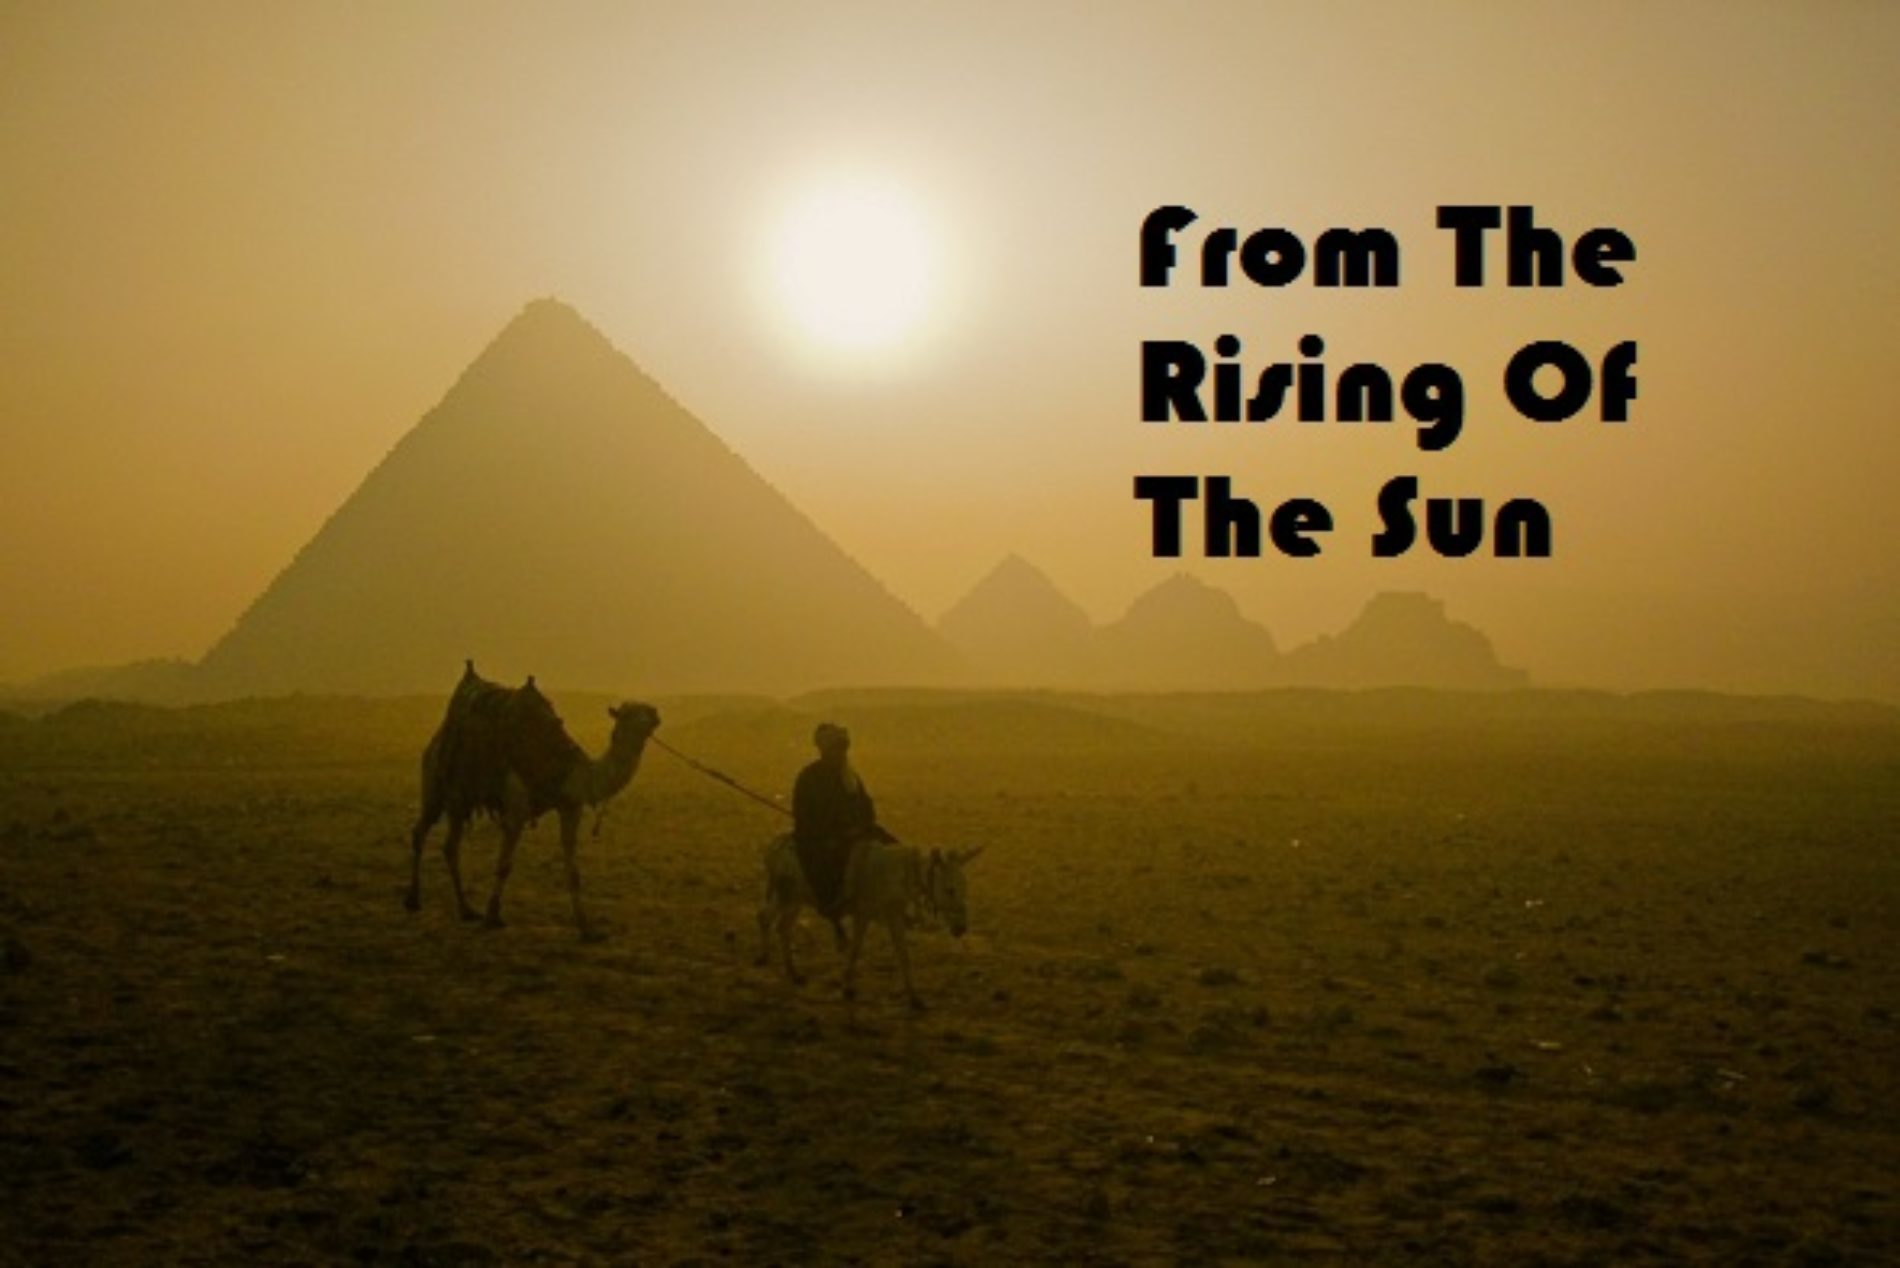 FROM THE RISING OF THE SUN (Episode 3)